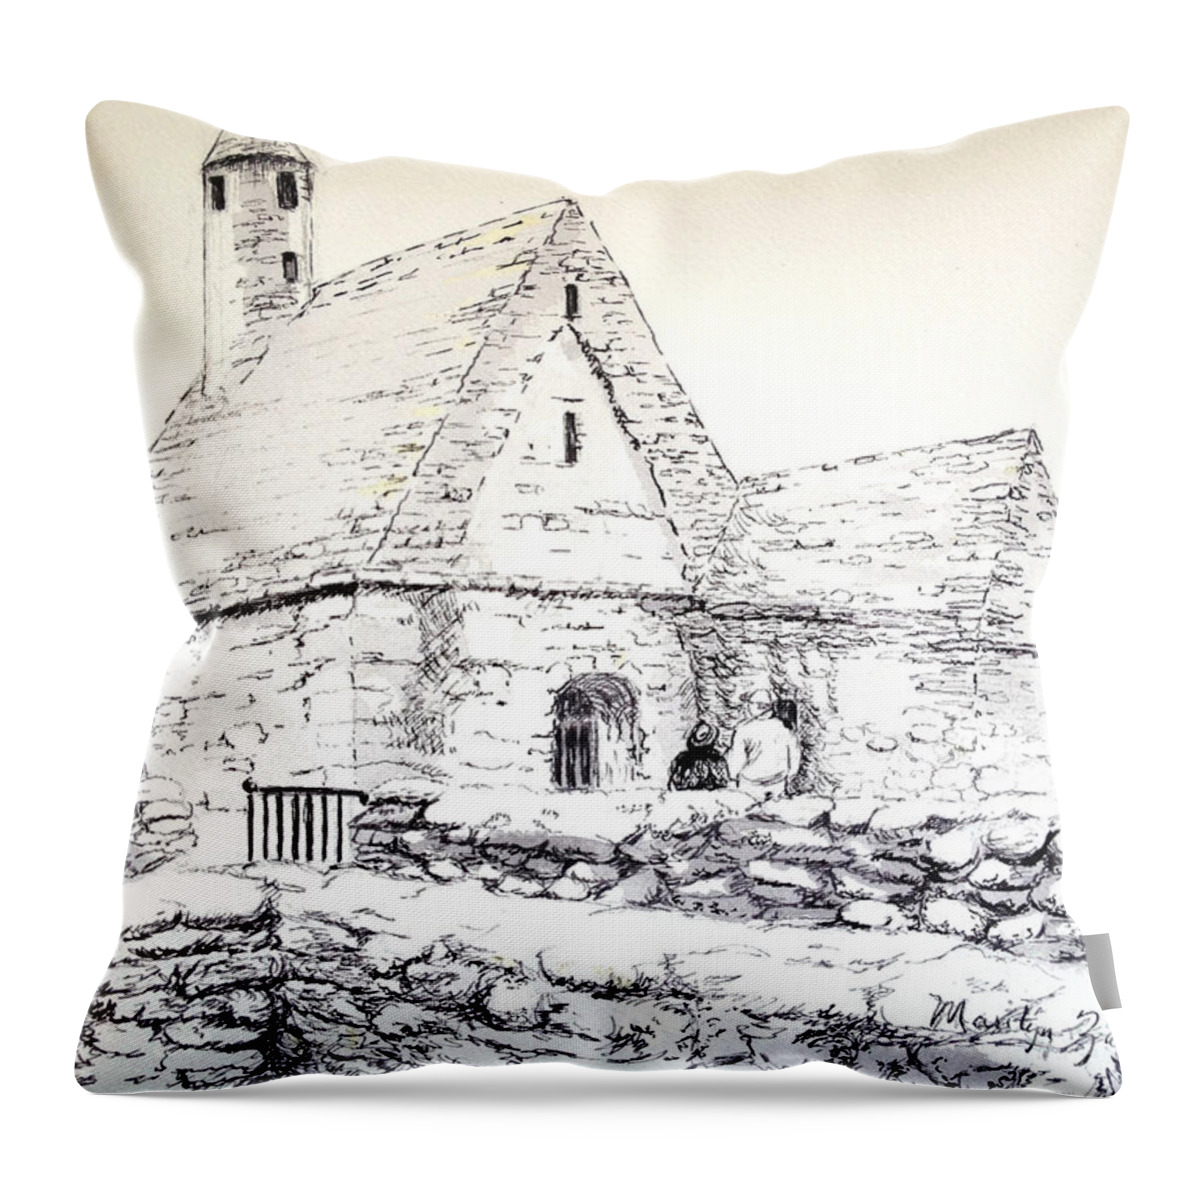 St Kevins's Throw Pillow featuring the drawing St Kevin's by Marilyn Zalatan